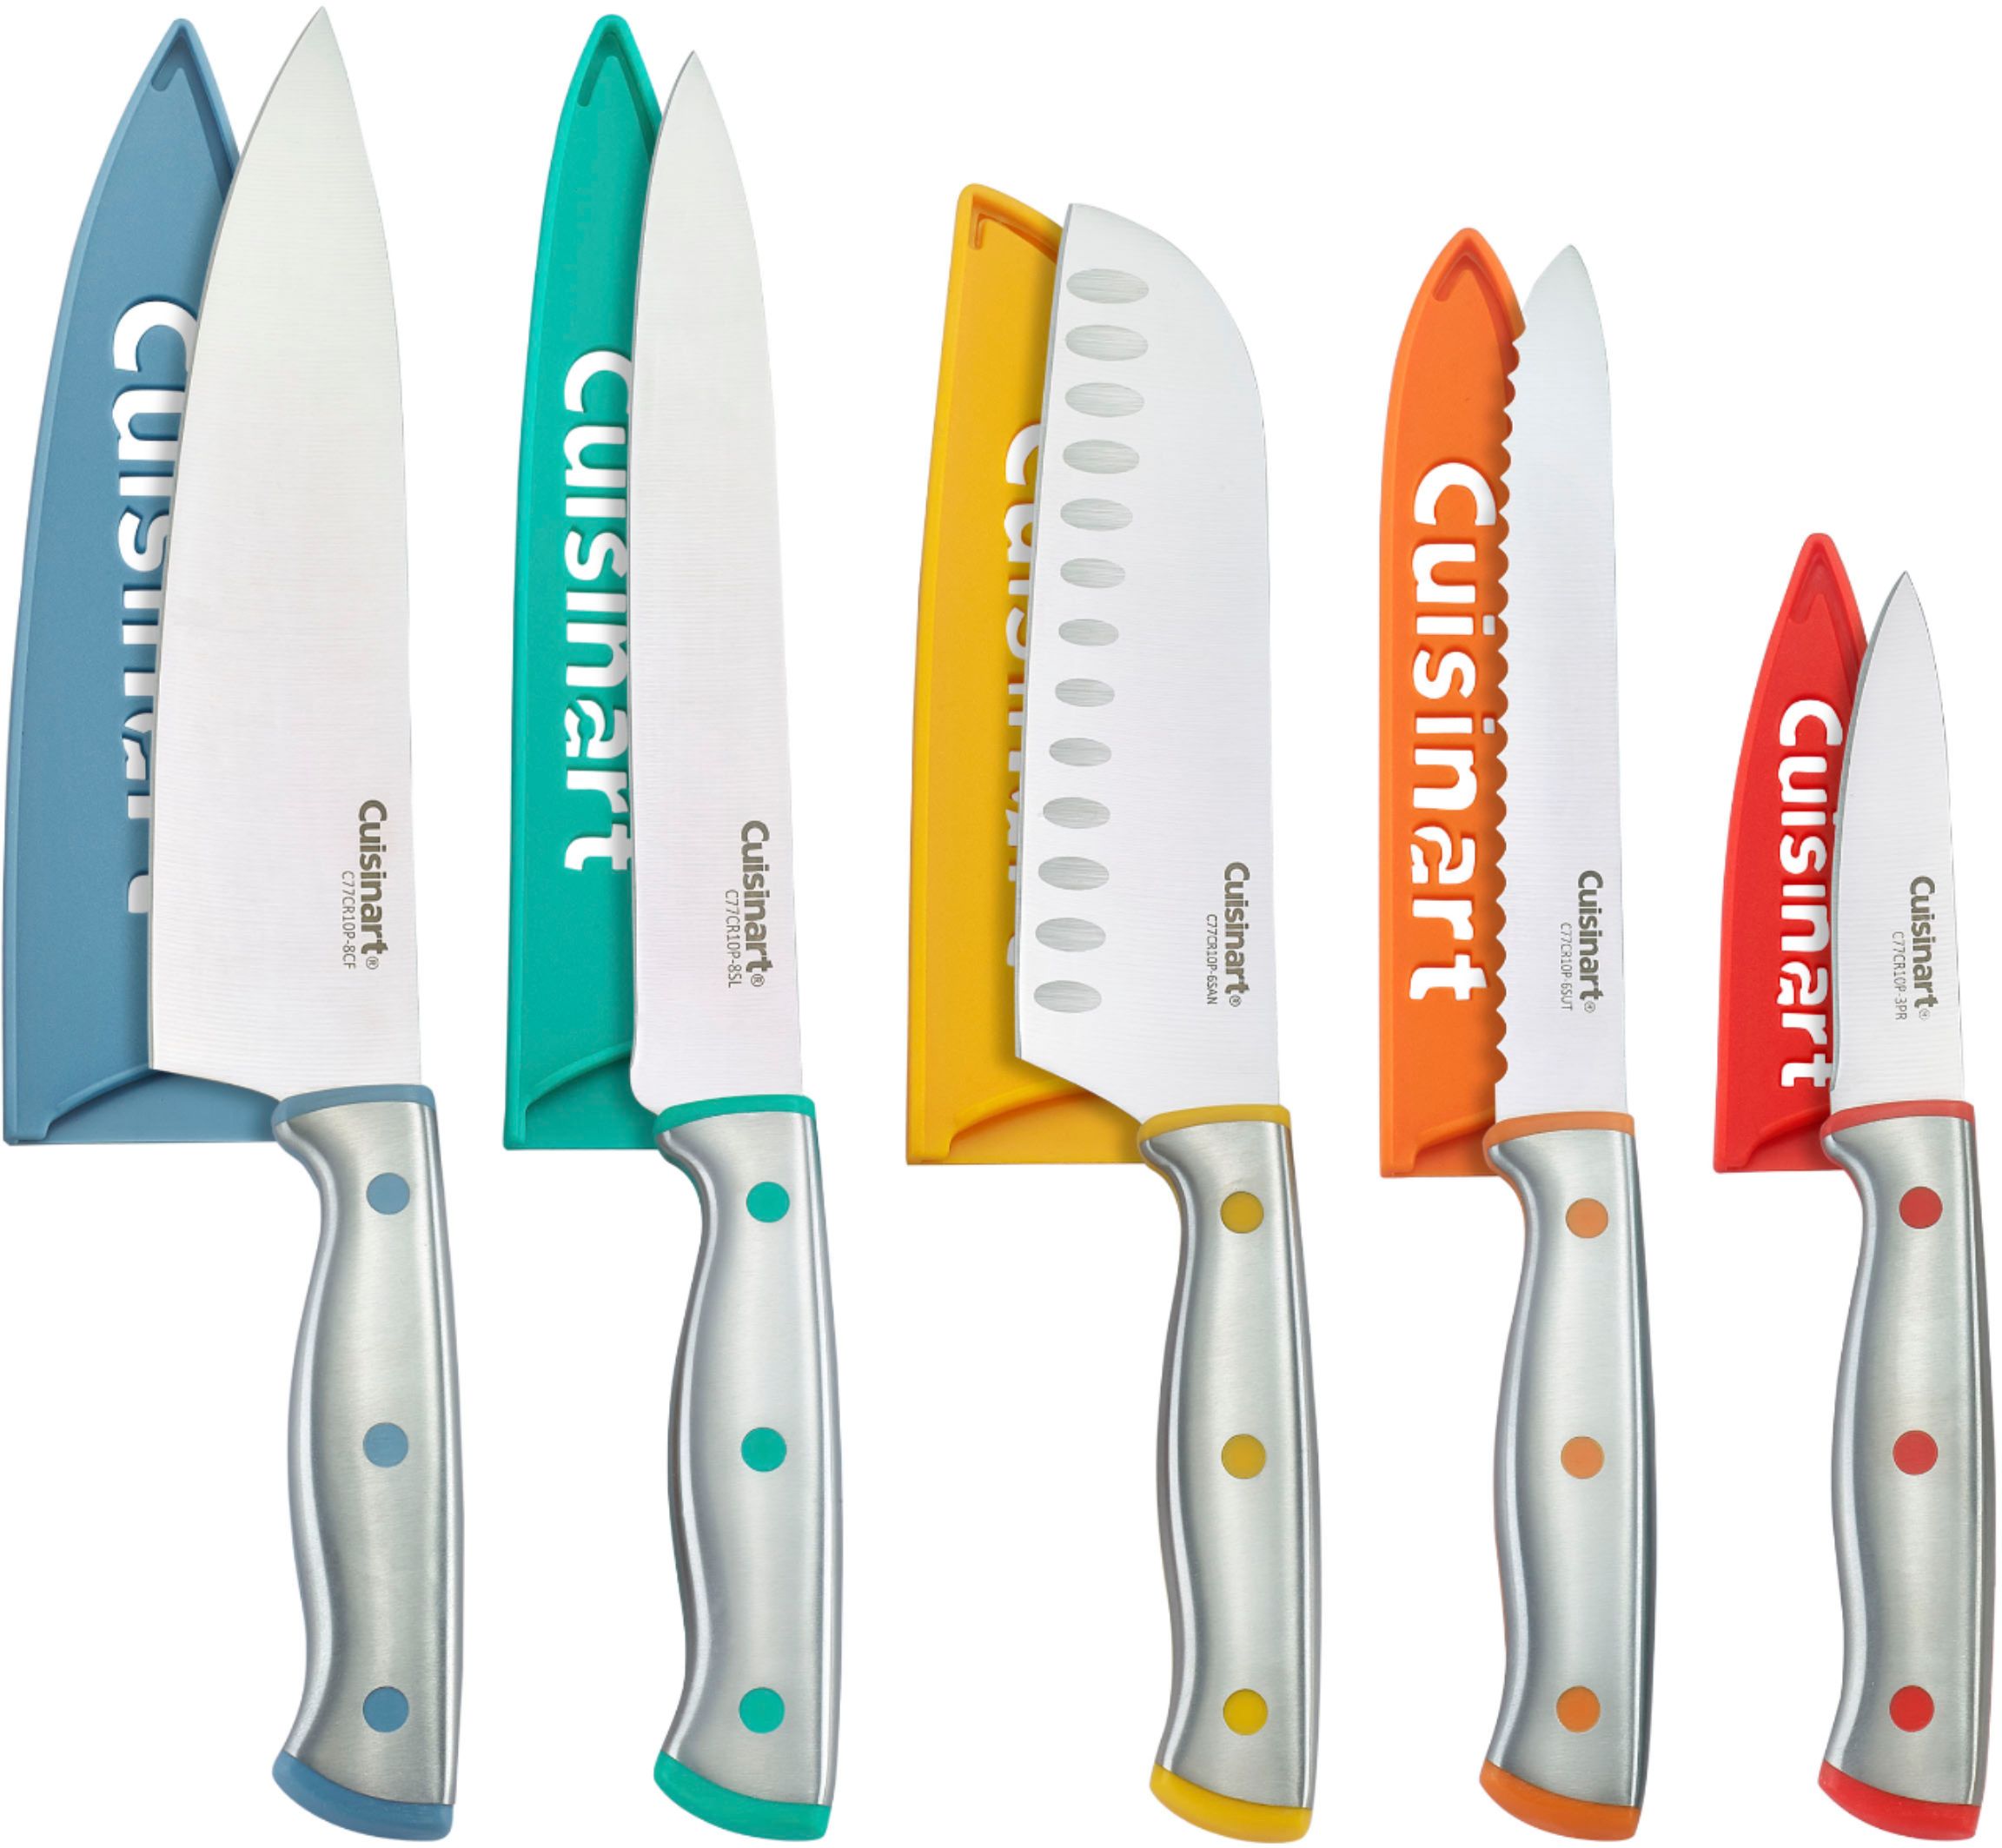 Cuisinart Classic 8pc Colored Stainless Steel Cutlery Set With